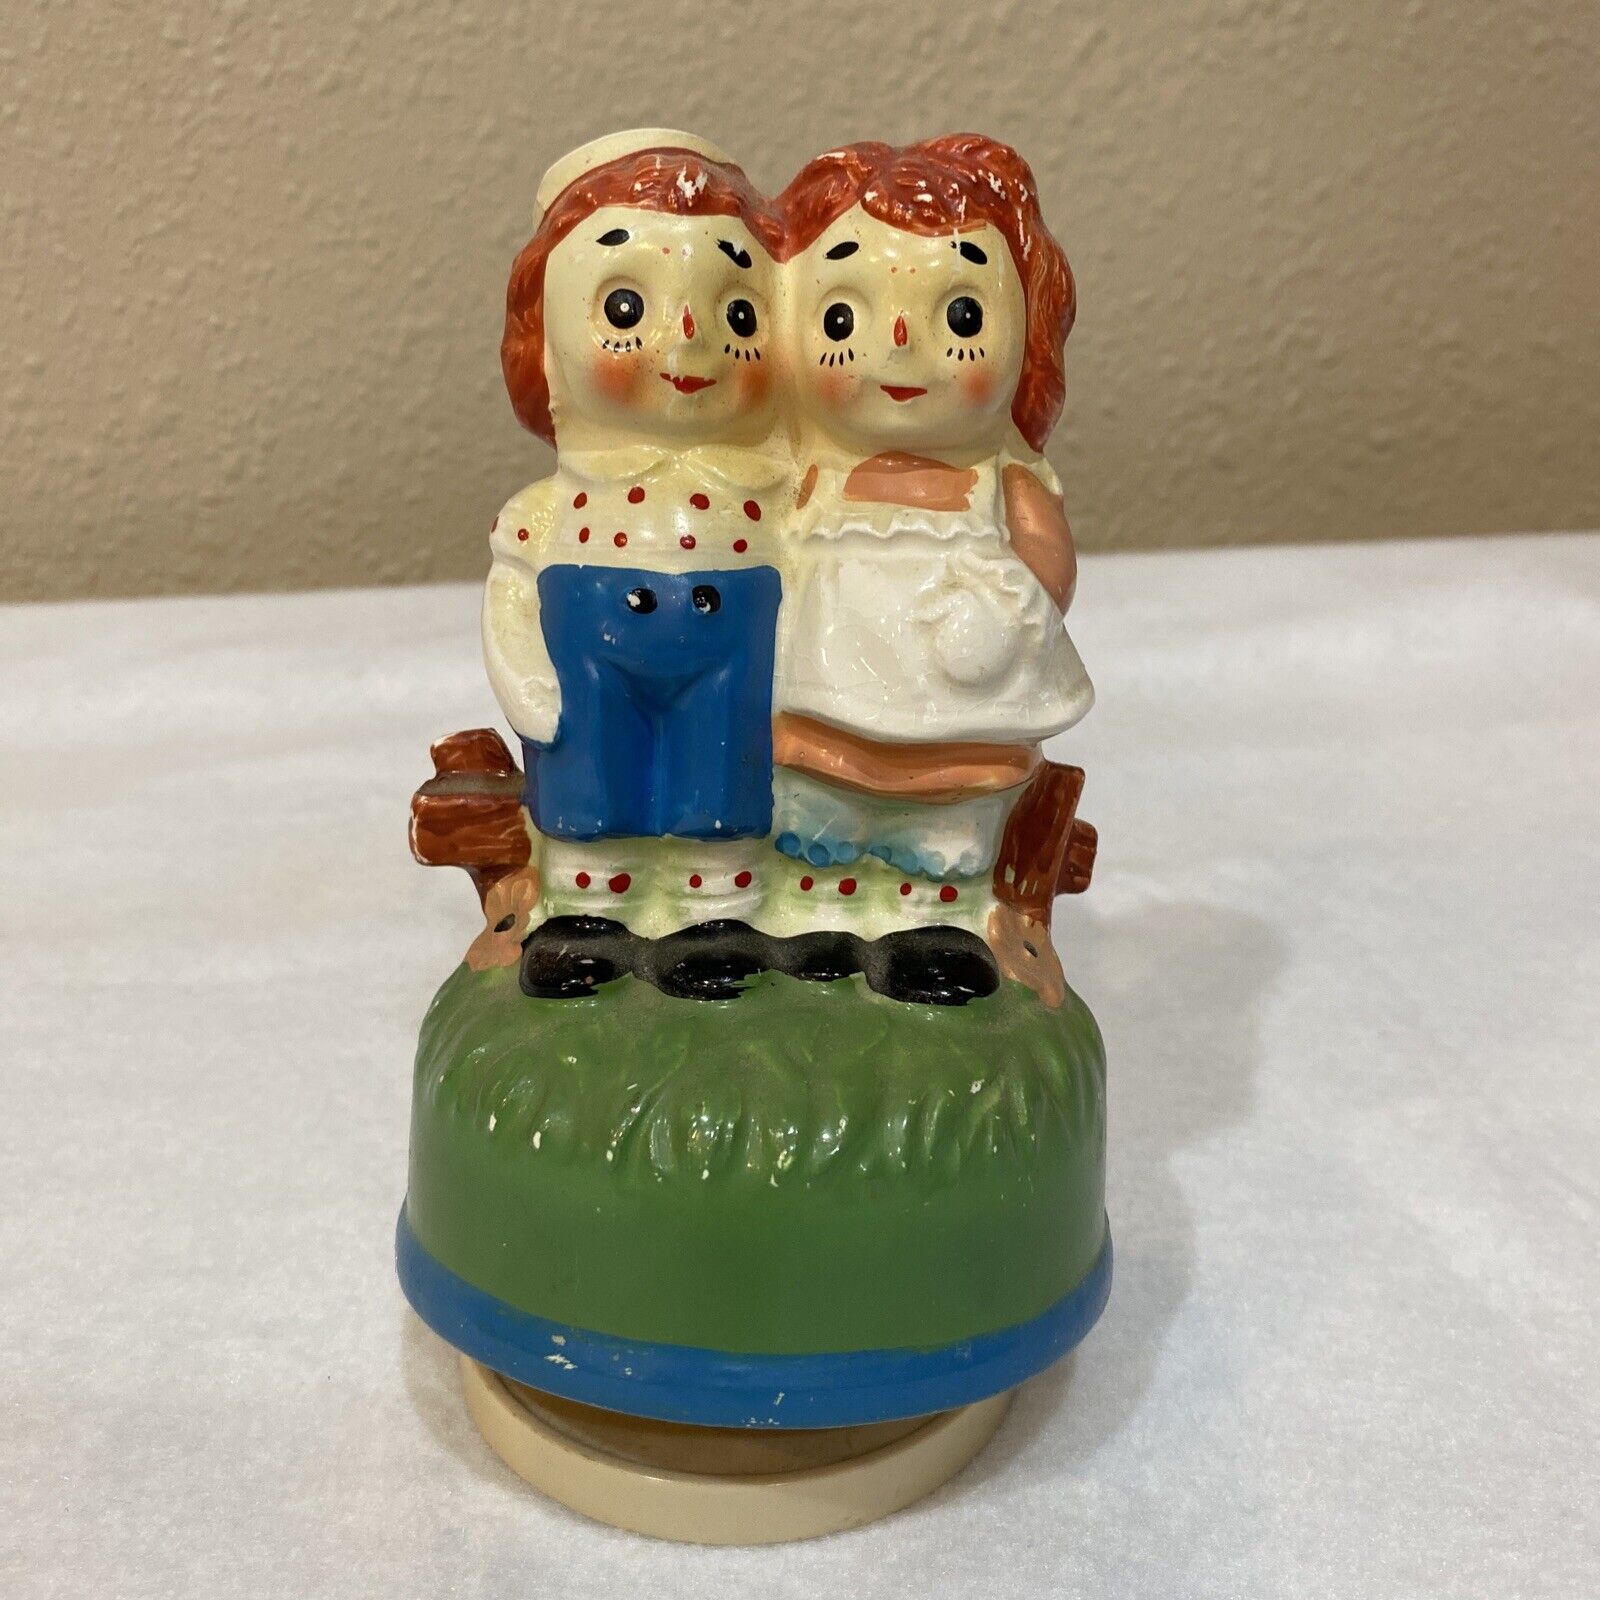 Vintage Raggedy Ann & Andy Ceramic Spinning Music Box Plays Made in Japan